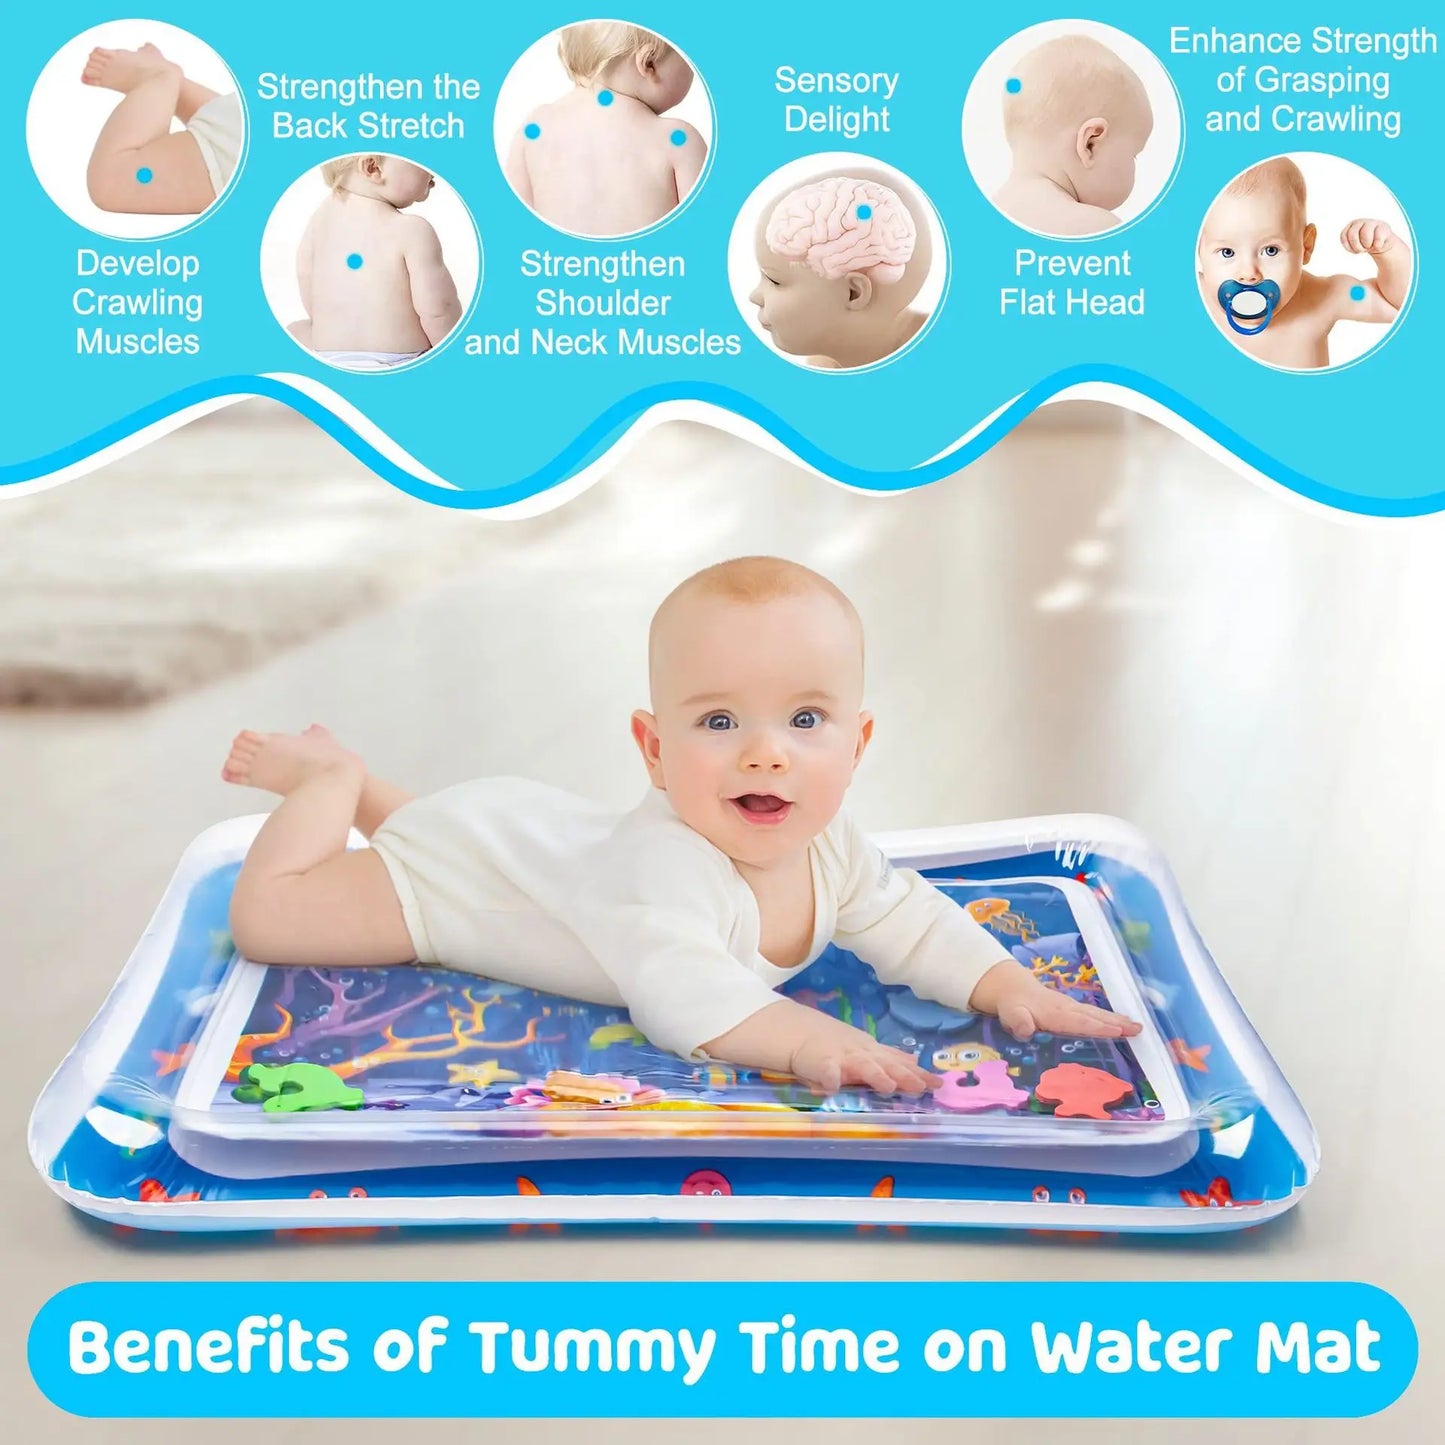 Fun Marine Animal Inflatable Water Pad: Perfect Baby Crawling Toy!